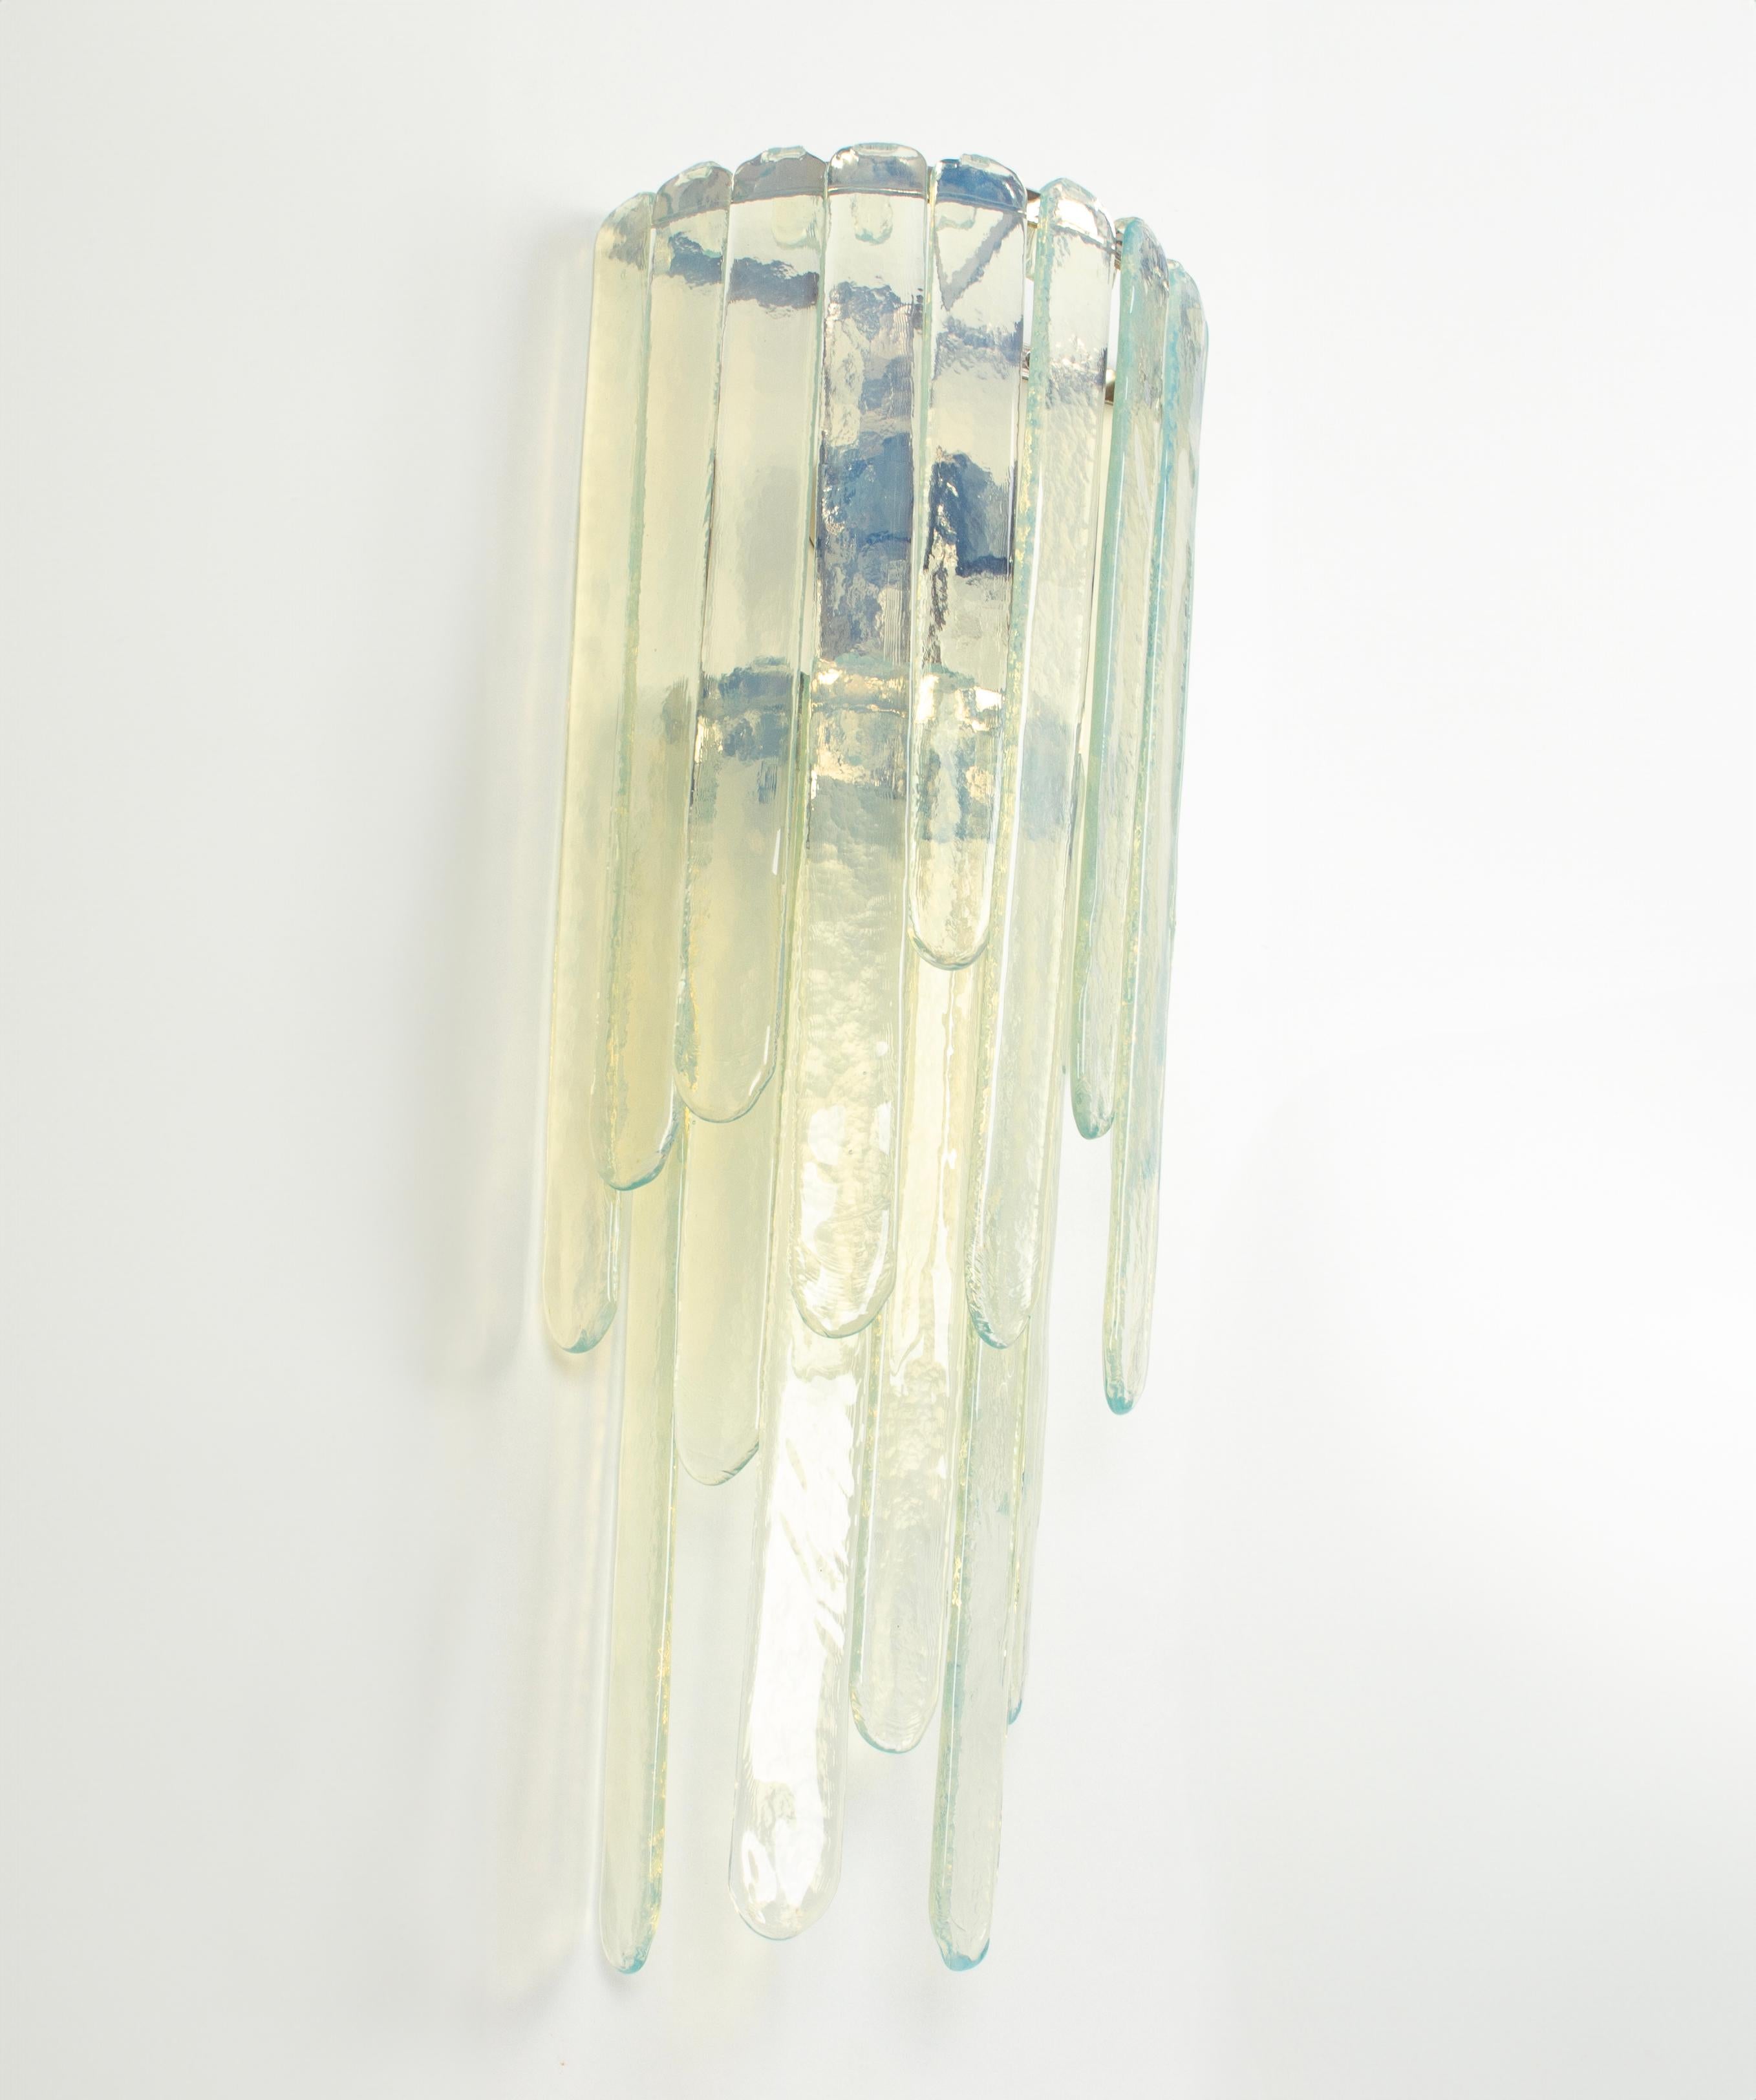 Extra Large Blue Murano Glass Wall Lamp by Carlo Nason for Mazzega, Italy, 1970s For Sale 4